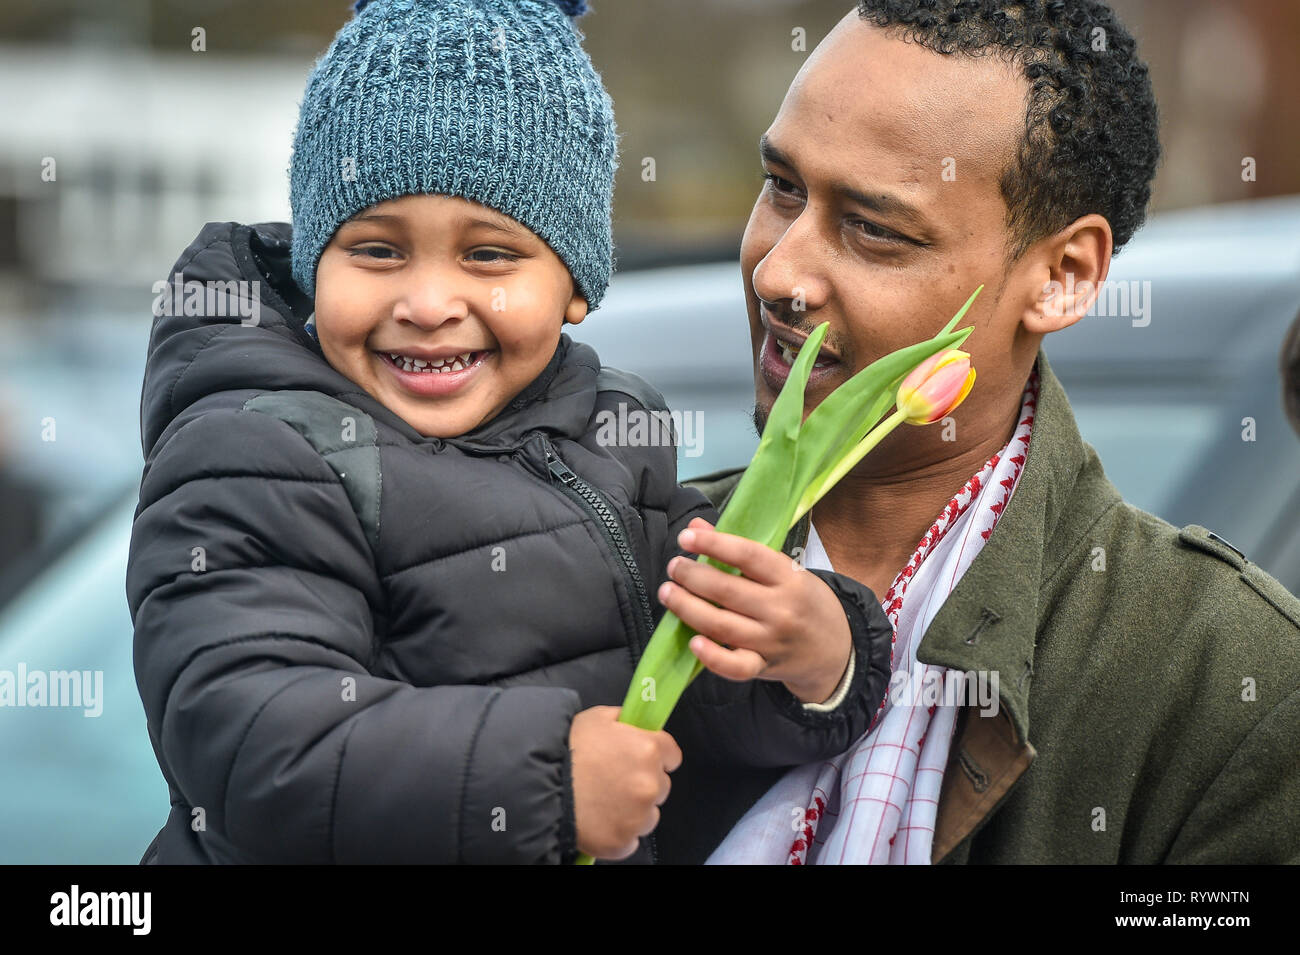 Jabiral Abdi, two, from Birmingham, with his dad Said Abdi, holds a yellow flower given to him by Christian James Lynch, from Riverside Church, who is handing out flowers to Muslims as they leave Birmingham Central Mosque after the attack on the Mosque in Christchurch, New Zealand. Stock Photo